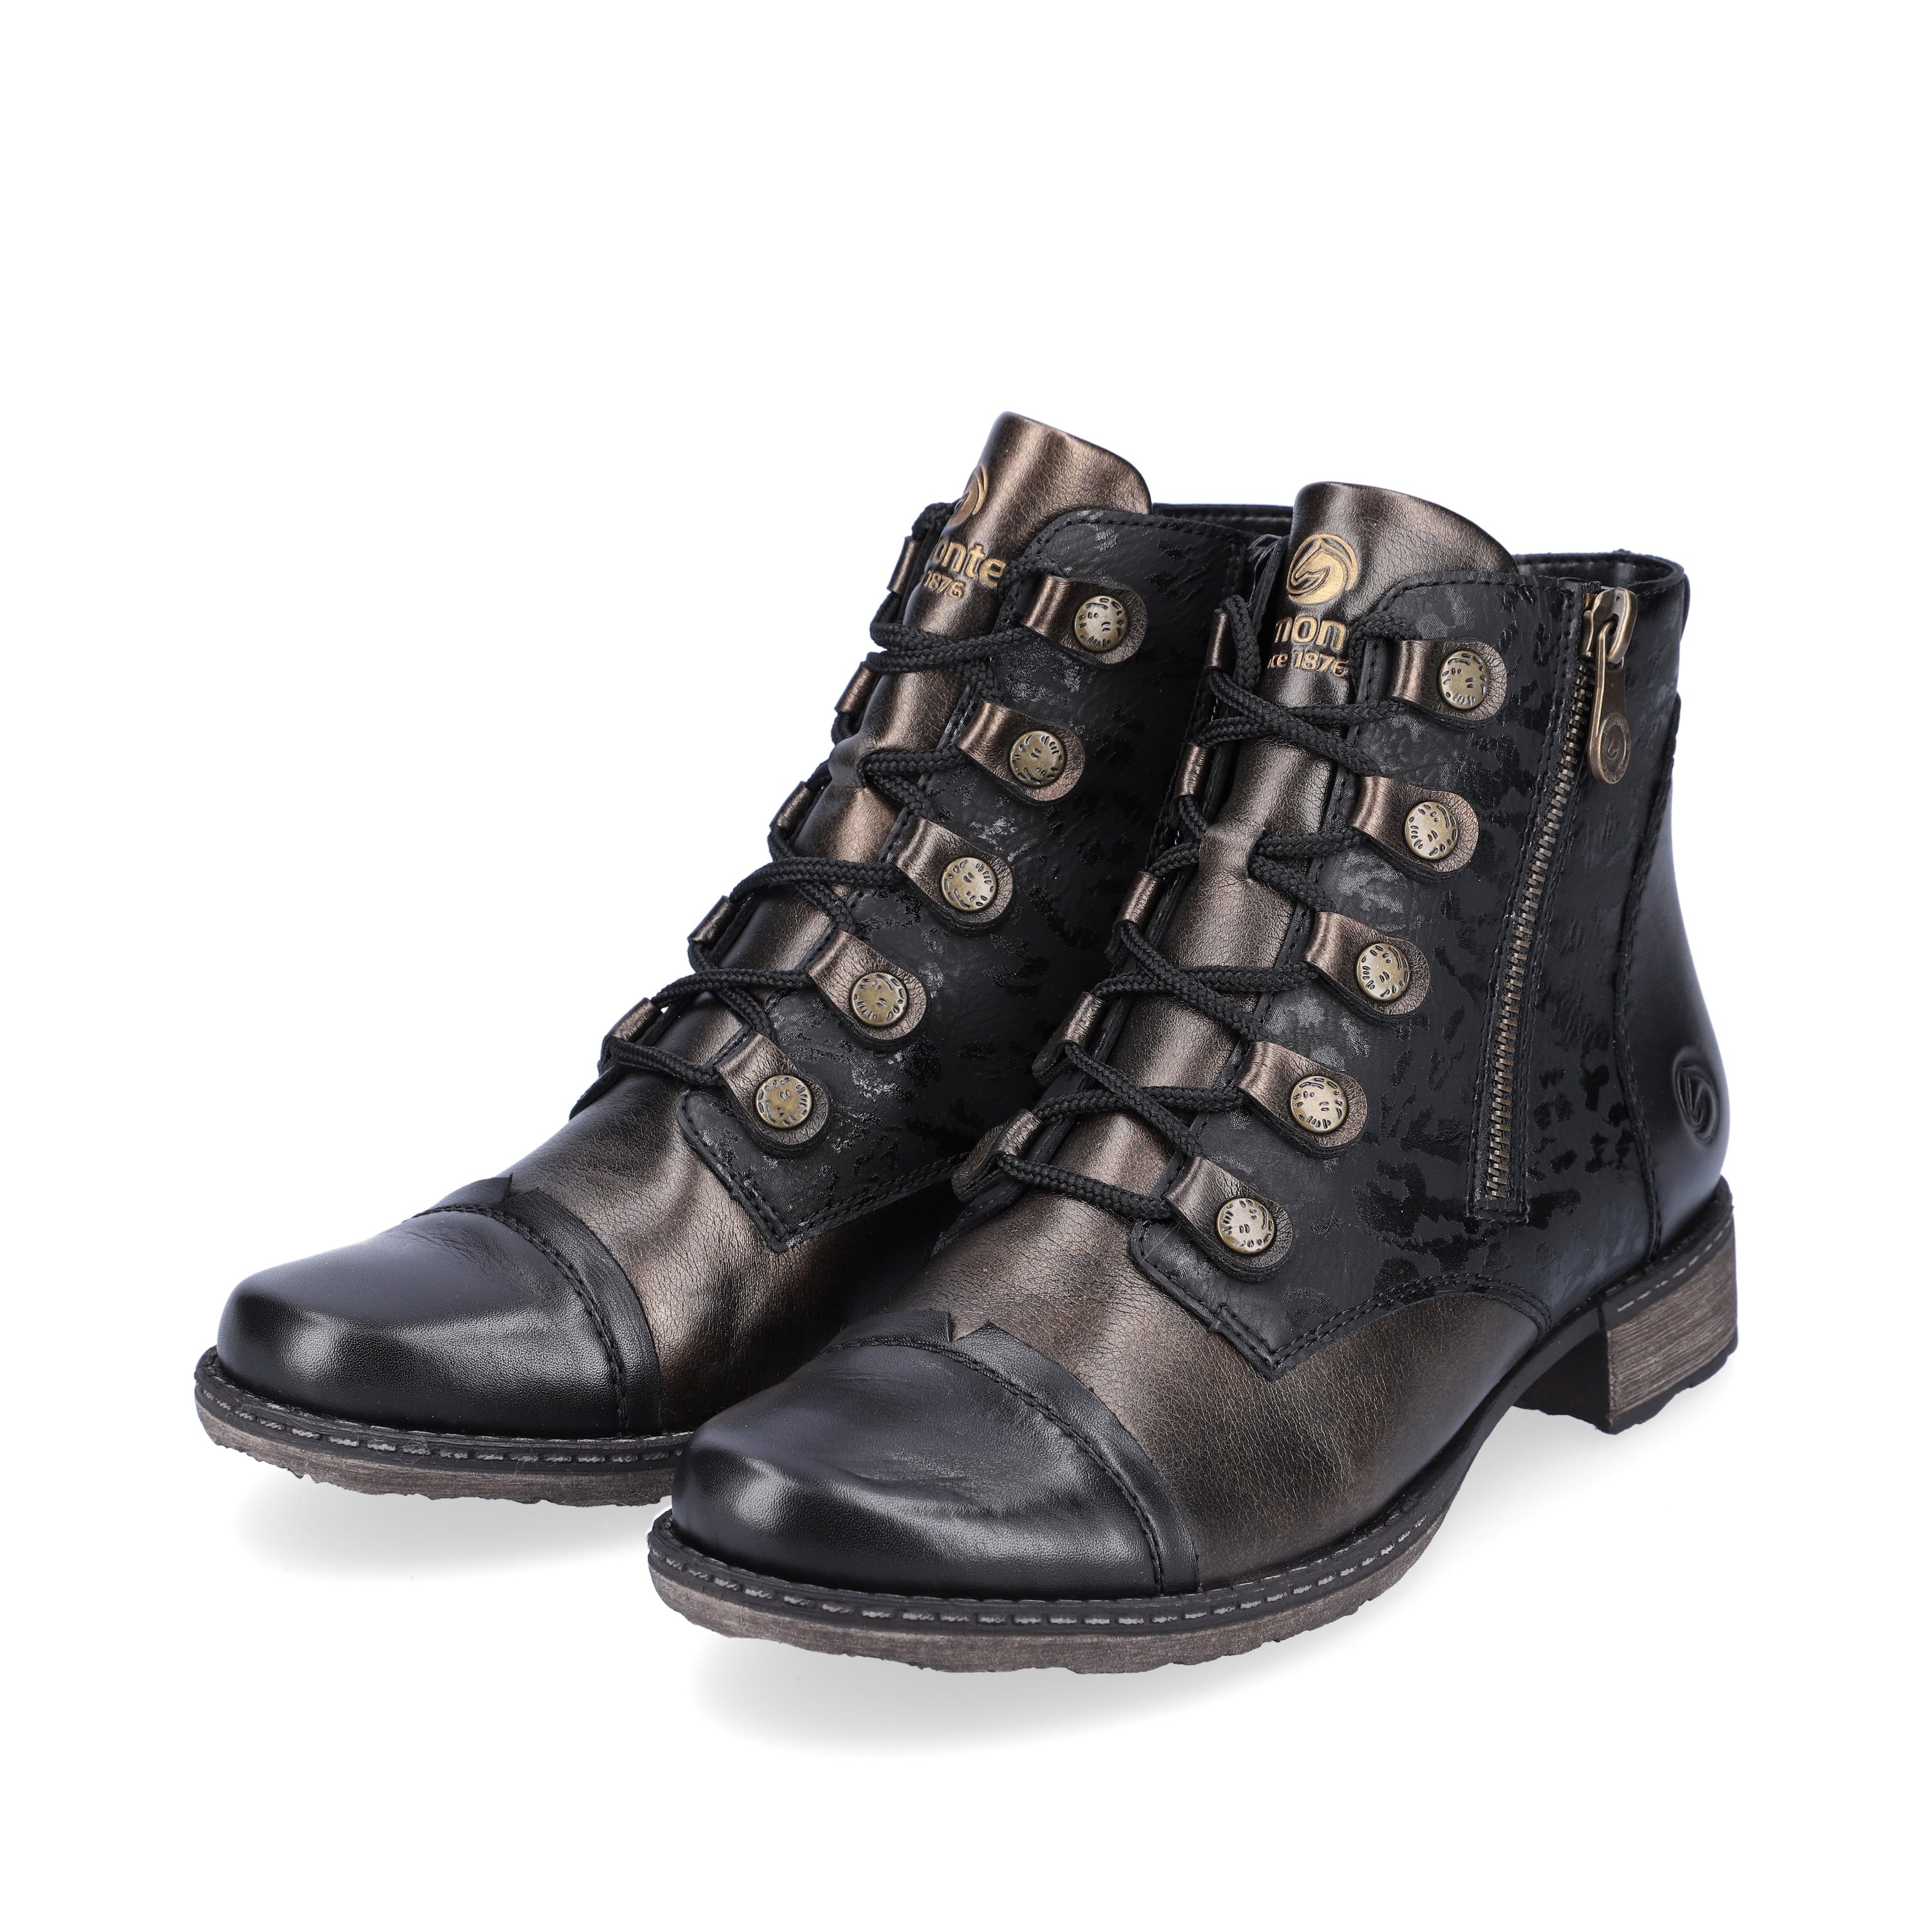 Black remonte women´s lace-up boots D4391-02 with hard-wearing profile sole. Shoe laterally